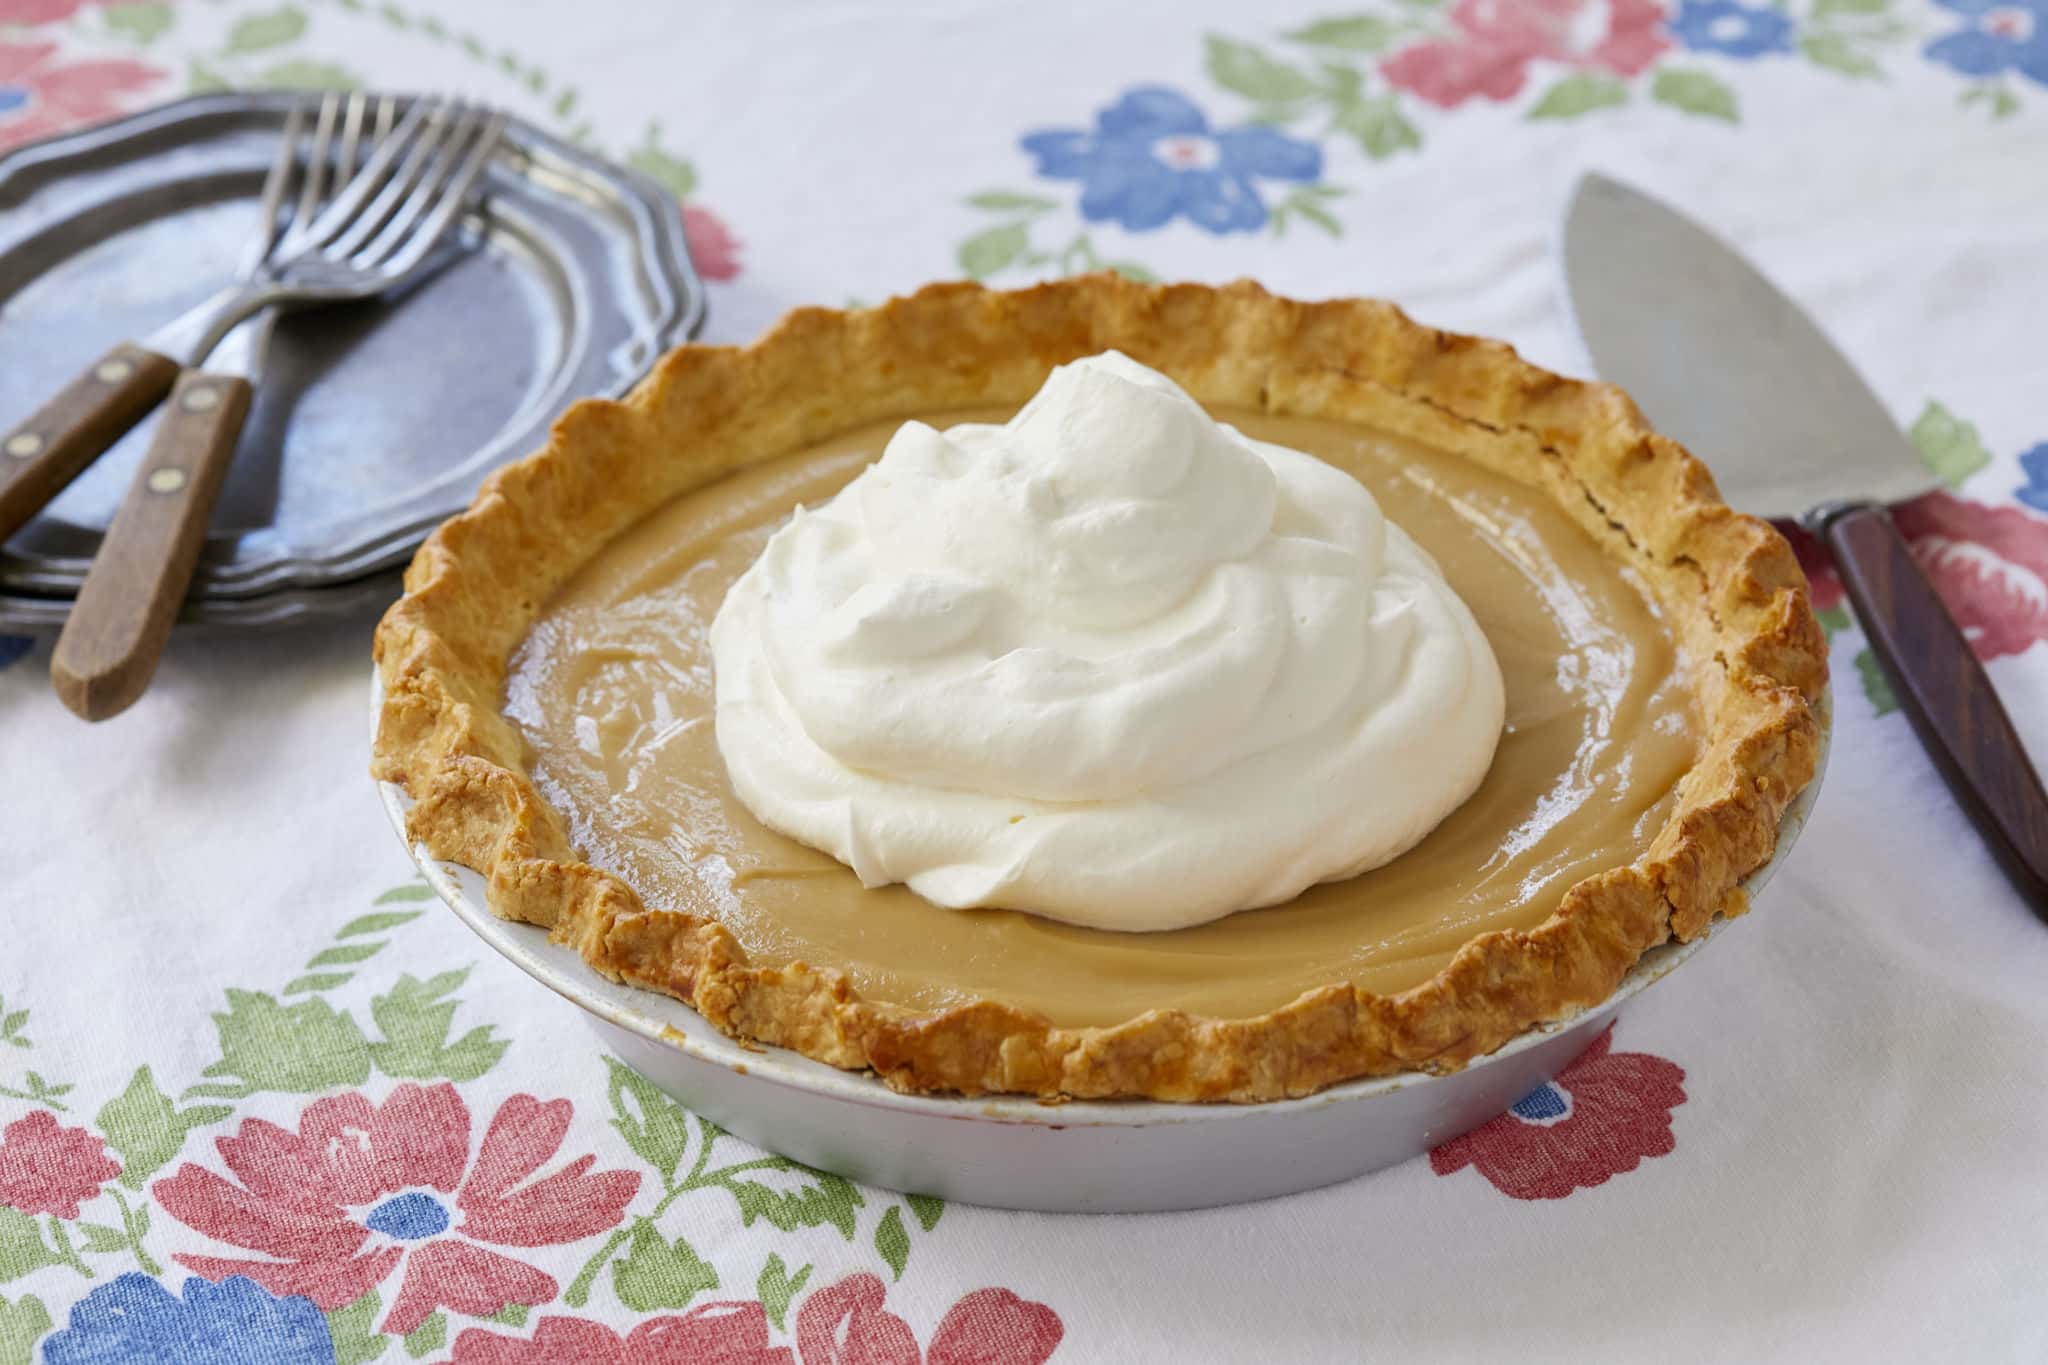 A homemade Maple Cream Pie is served on a floral tablecloth. The homemade pie has a big dollop of fresh whipped cream piled on top.